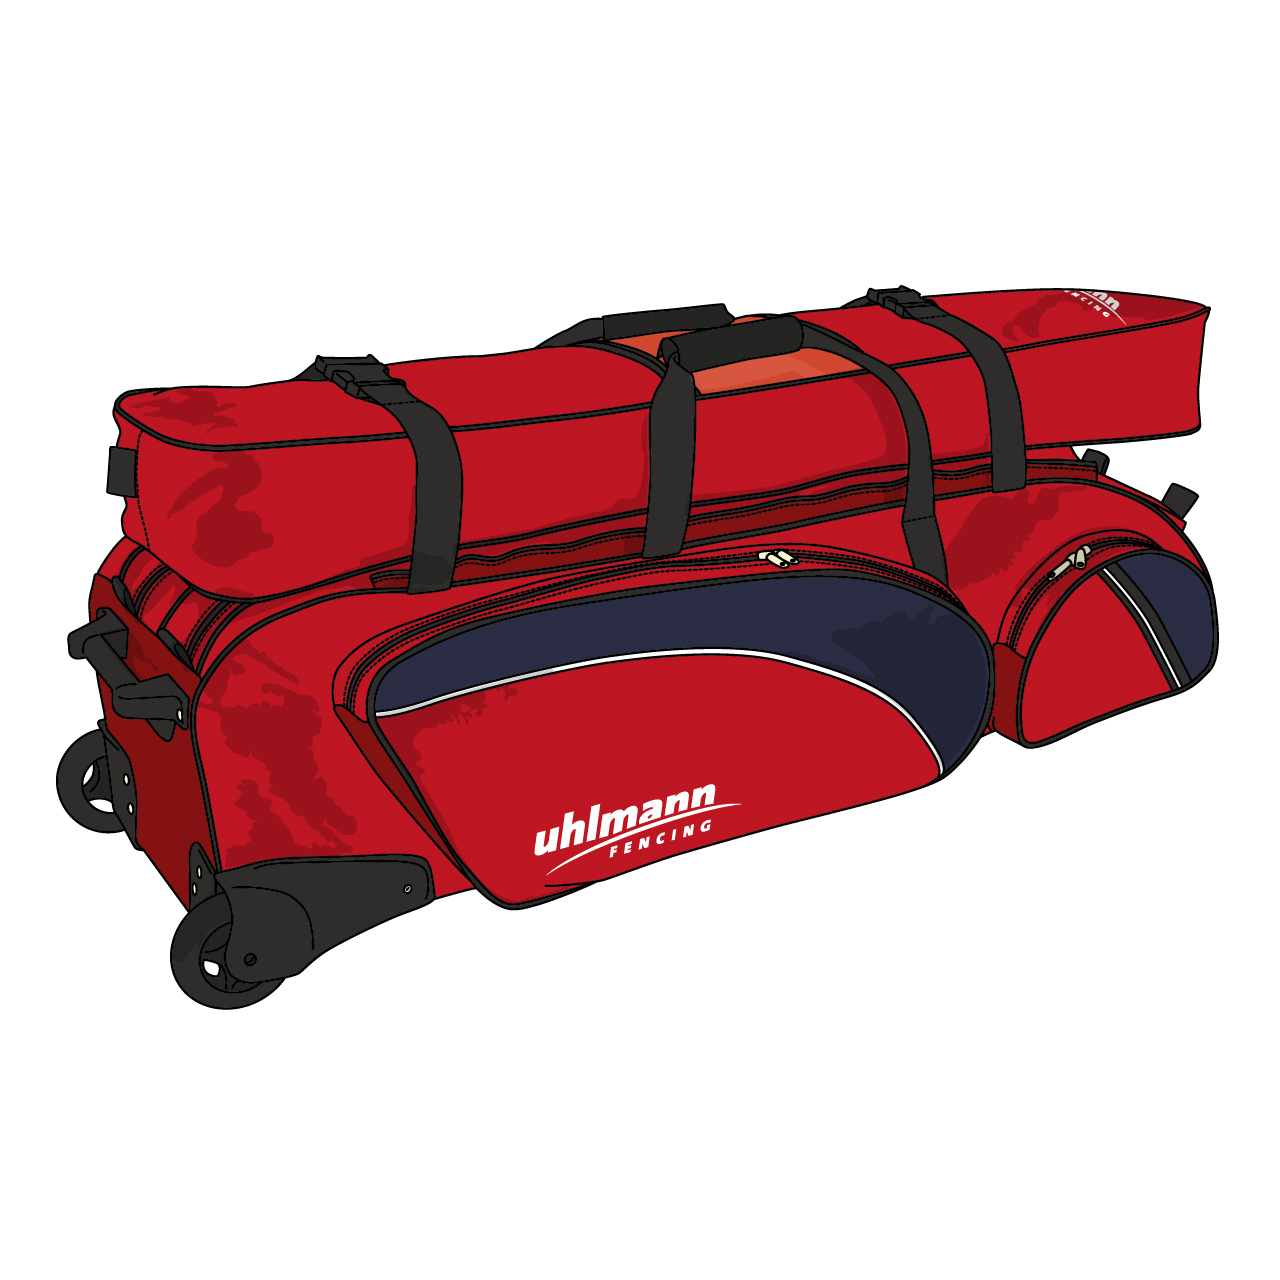 rollbag "Jumbo Special", 2 main partitions, 3 outside pockets, 1 high-top bag